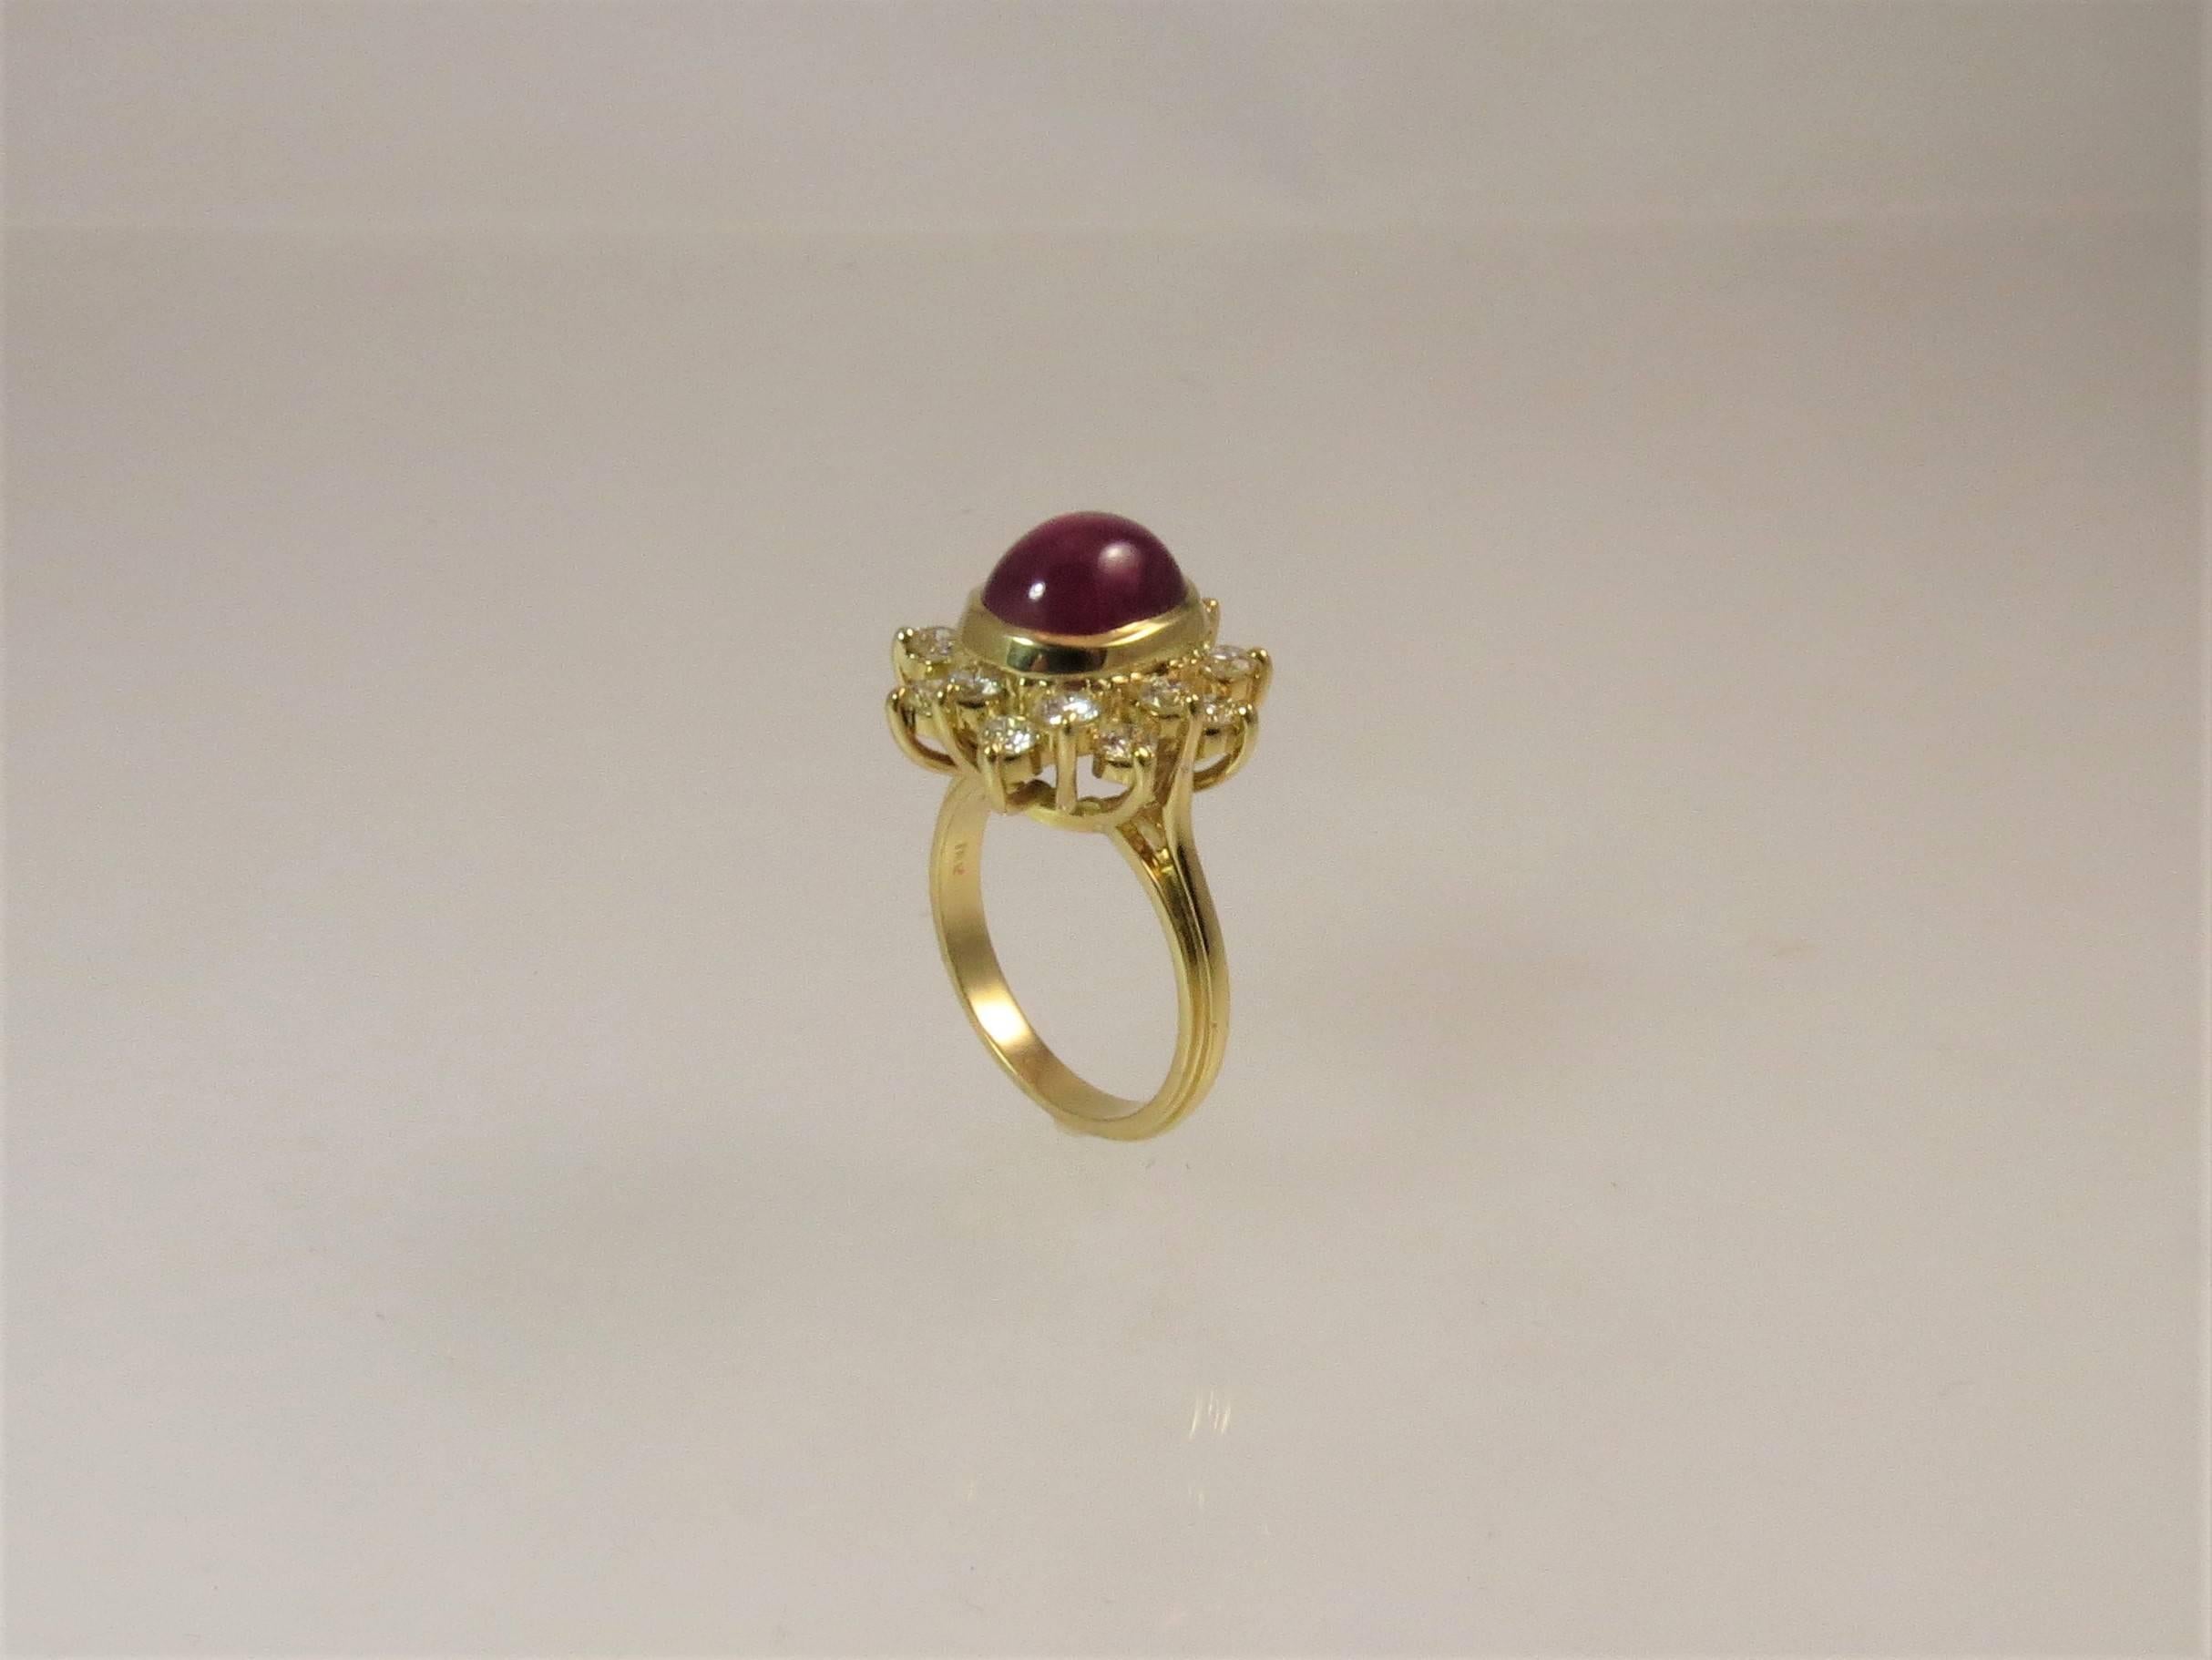 18K yellow gold ring, prong set in center with one Star Ruby weighing 7.62cts surrounded by 16 full cut round diamonds weighing 1.31cts, G-H color, VS-SI clarity.
Finger size 6.75. May be sized.